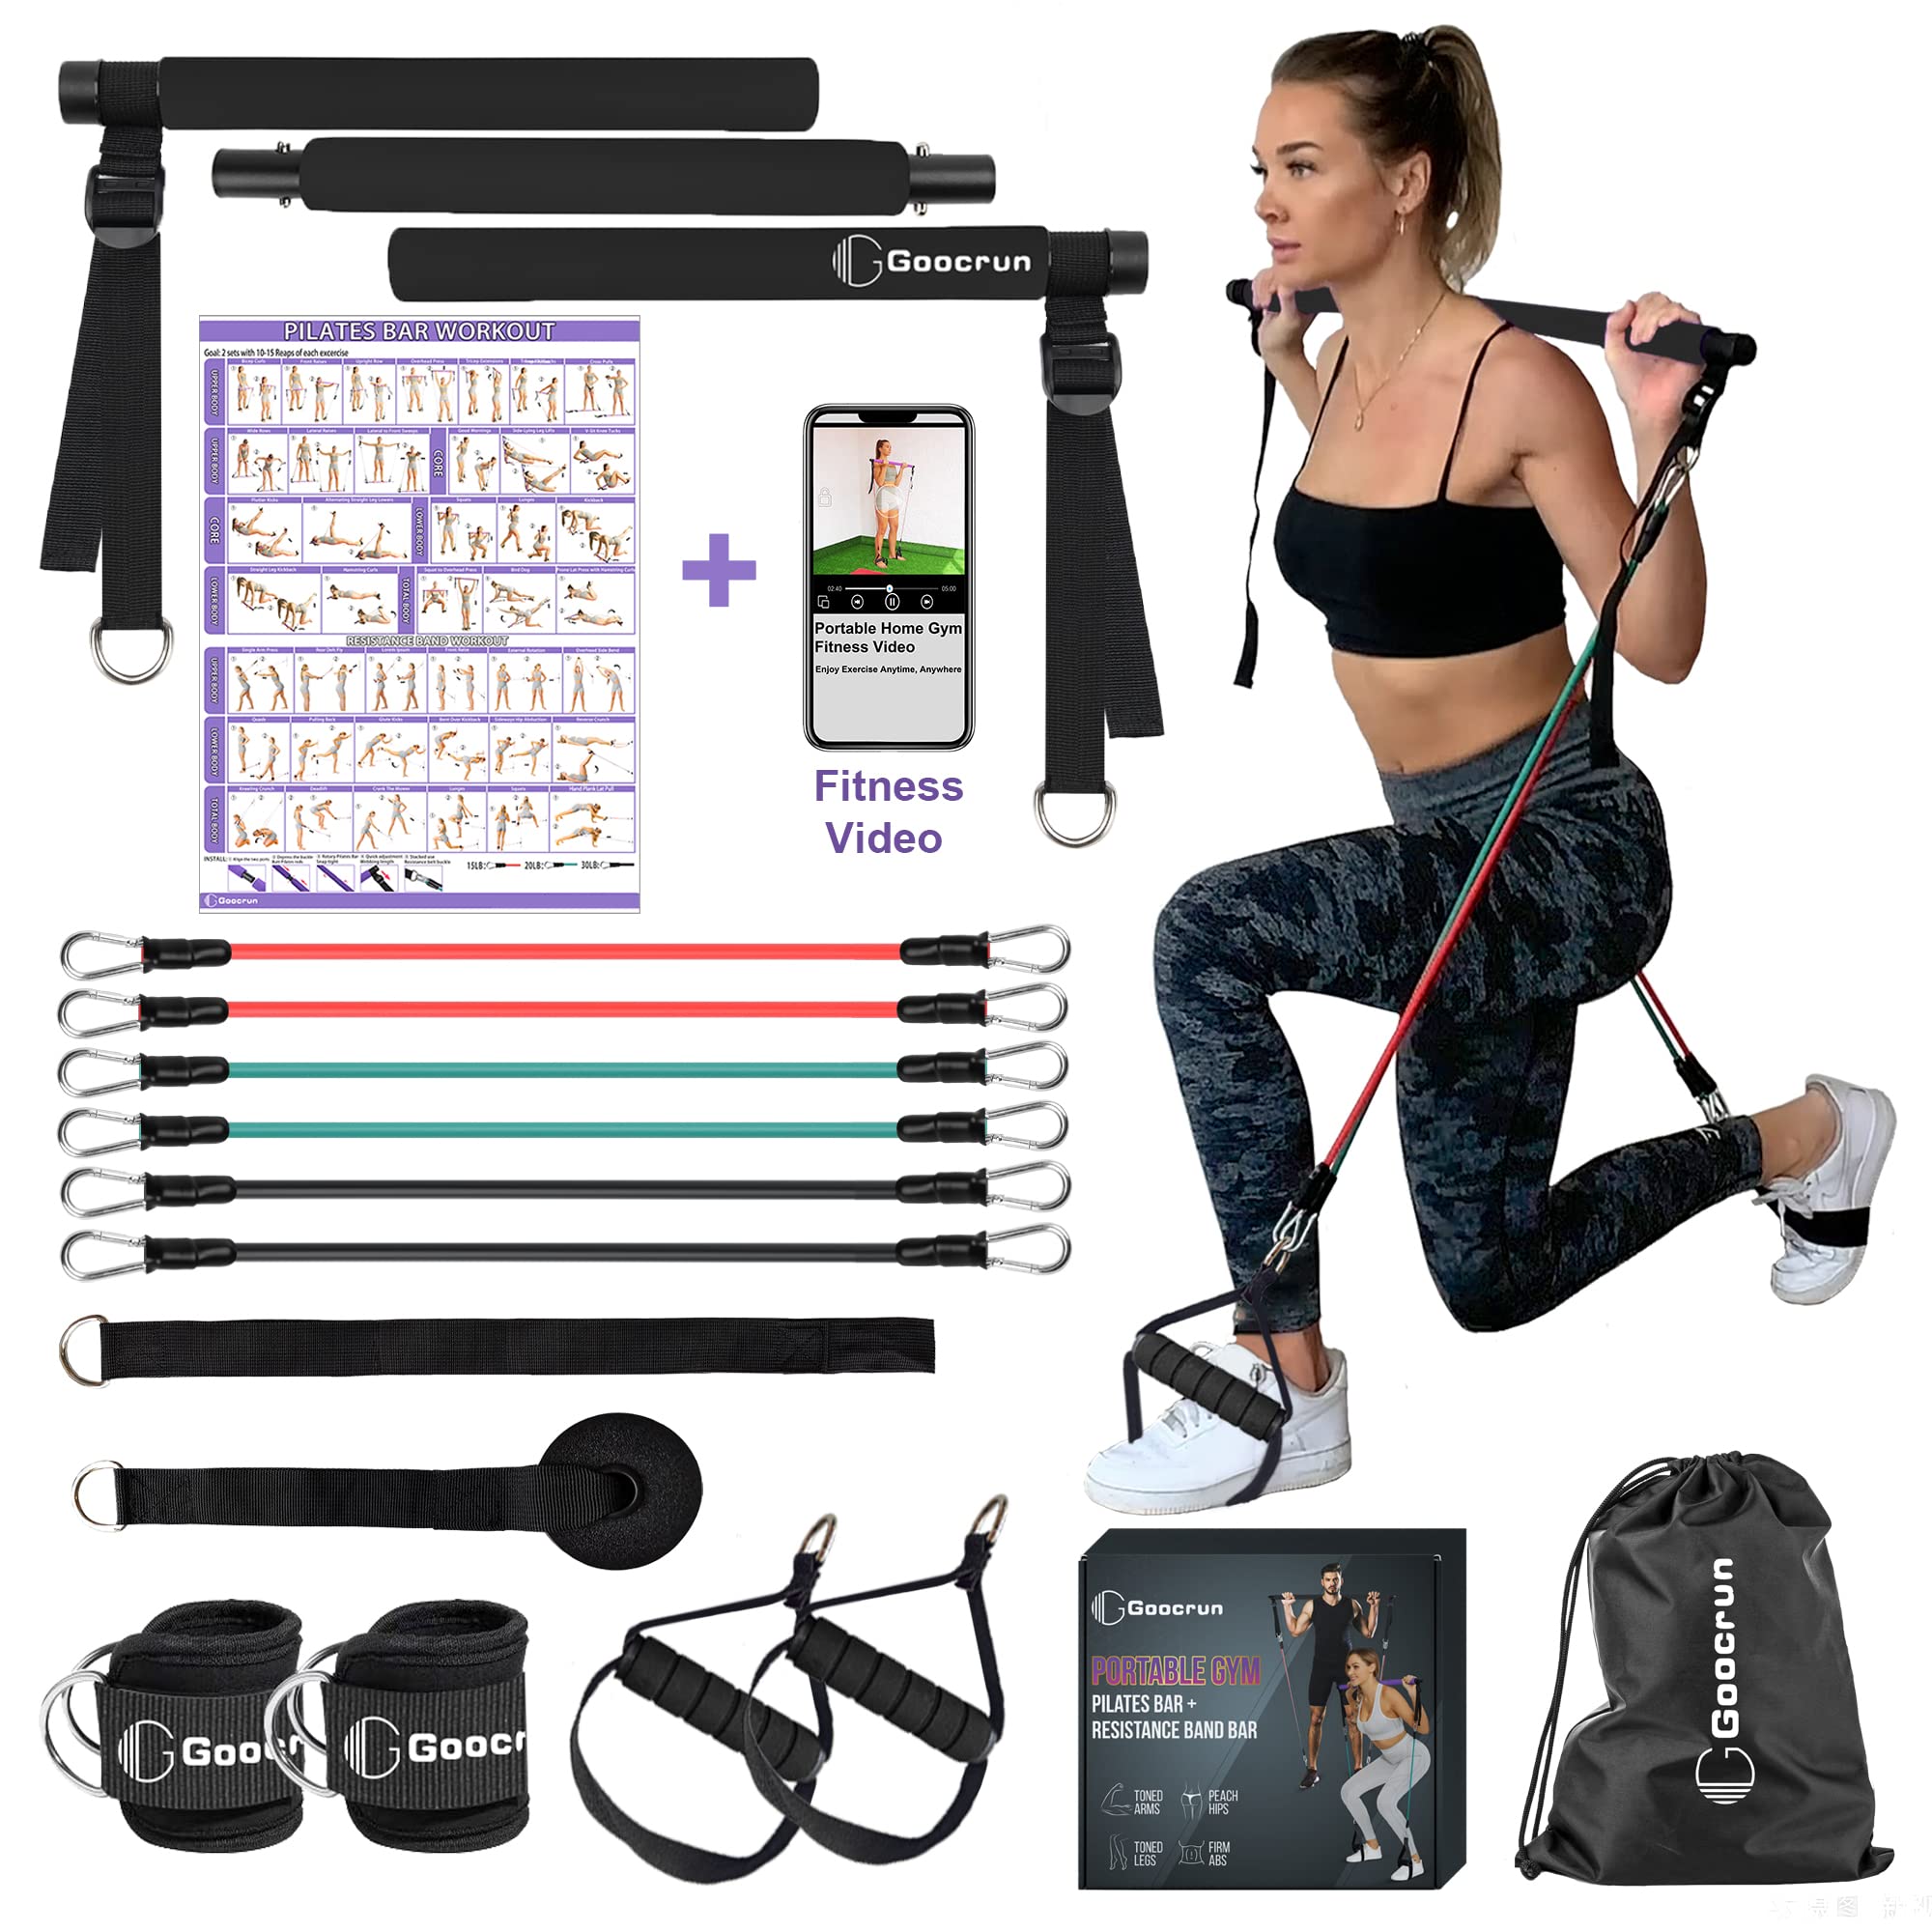 Portable Gym Accessories Exercise Equipment Workout From Home Full Body  Workout